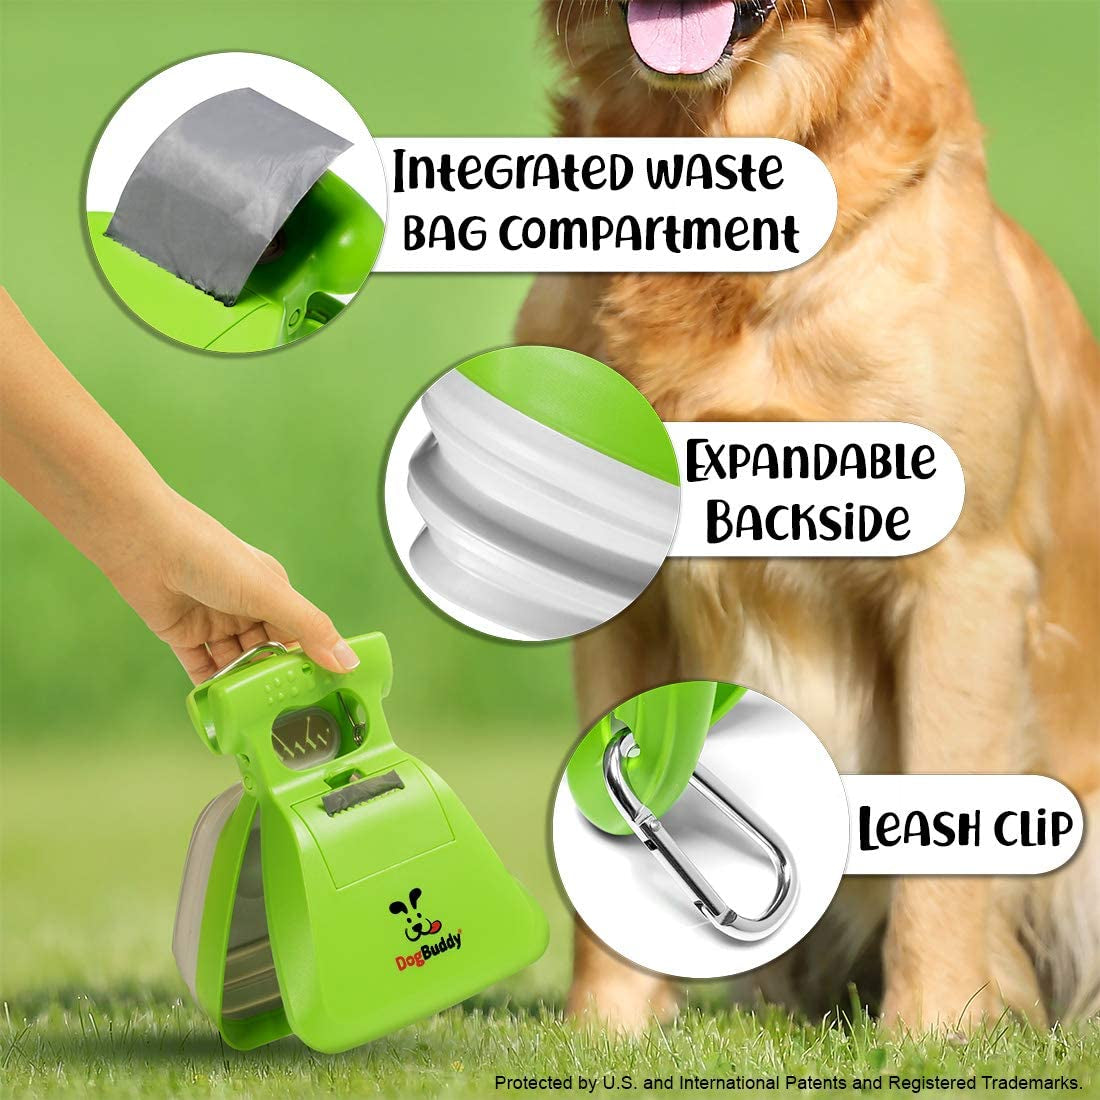 Pooper Scooper, Portable Dog Pooper Scooper, Poop Scoop for Small and Large Dogs, Pooper Scooper with Bag Attachment, Leash Clip and Dog Poop Bags Included (Medium, Kiwi)